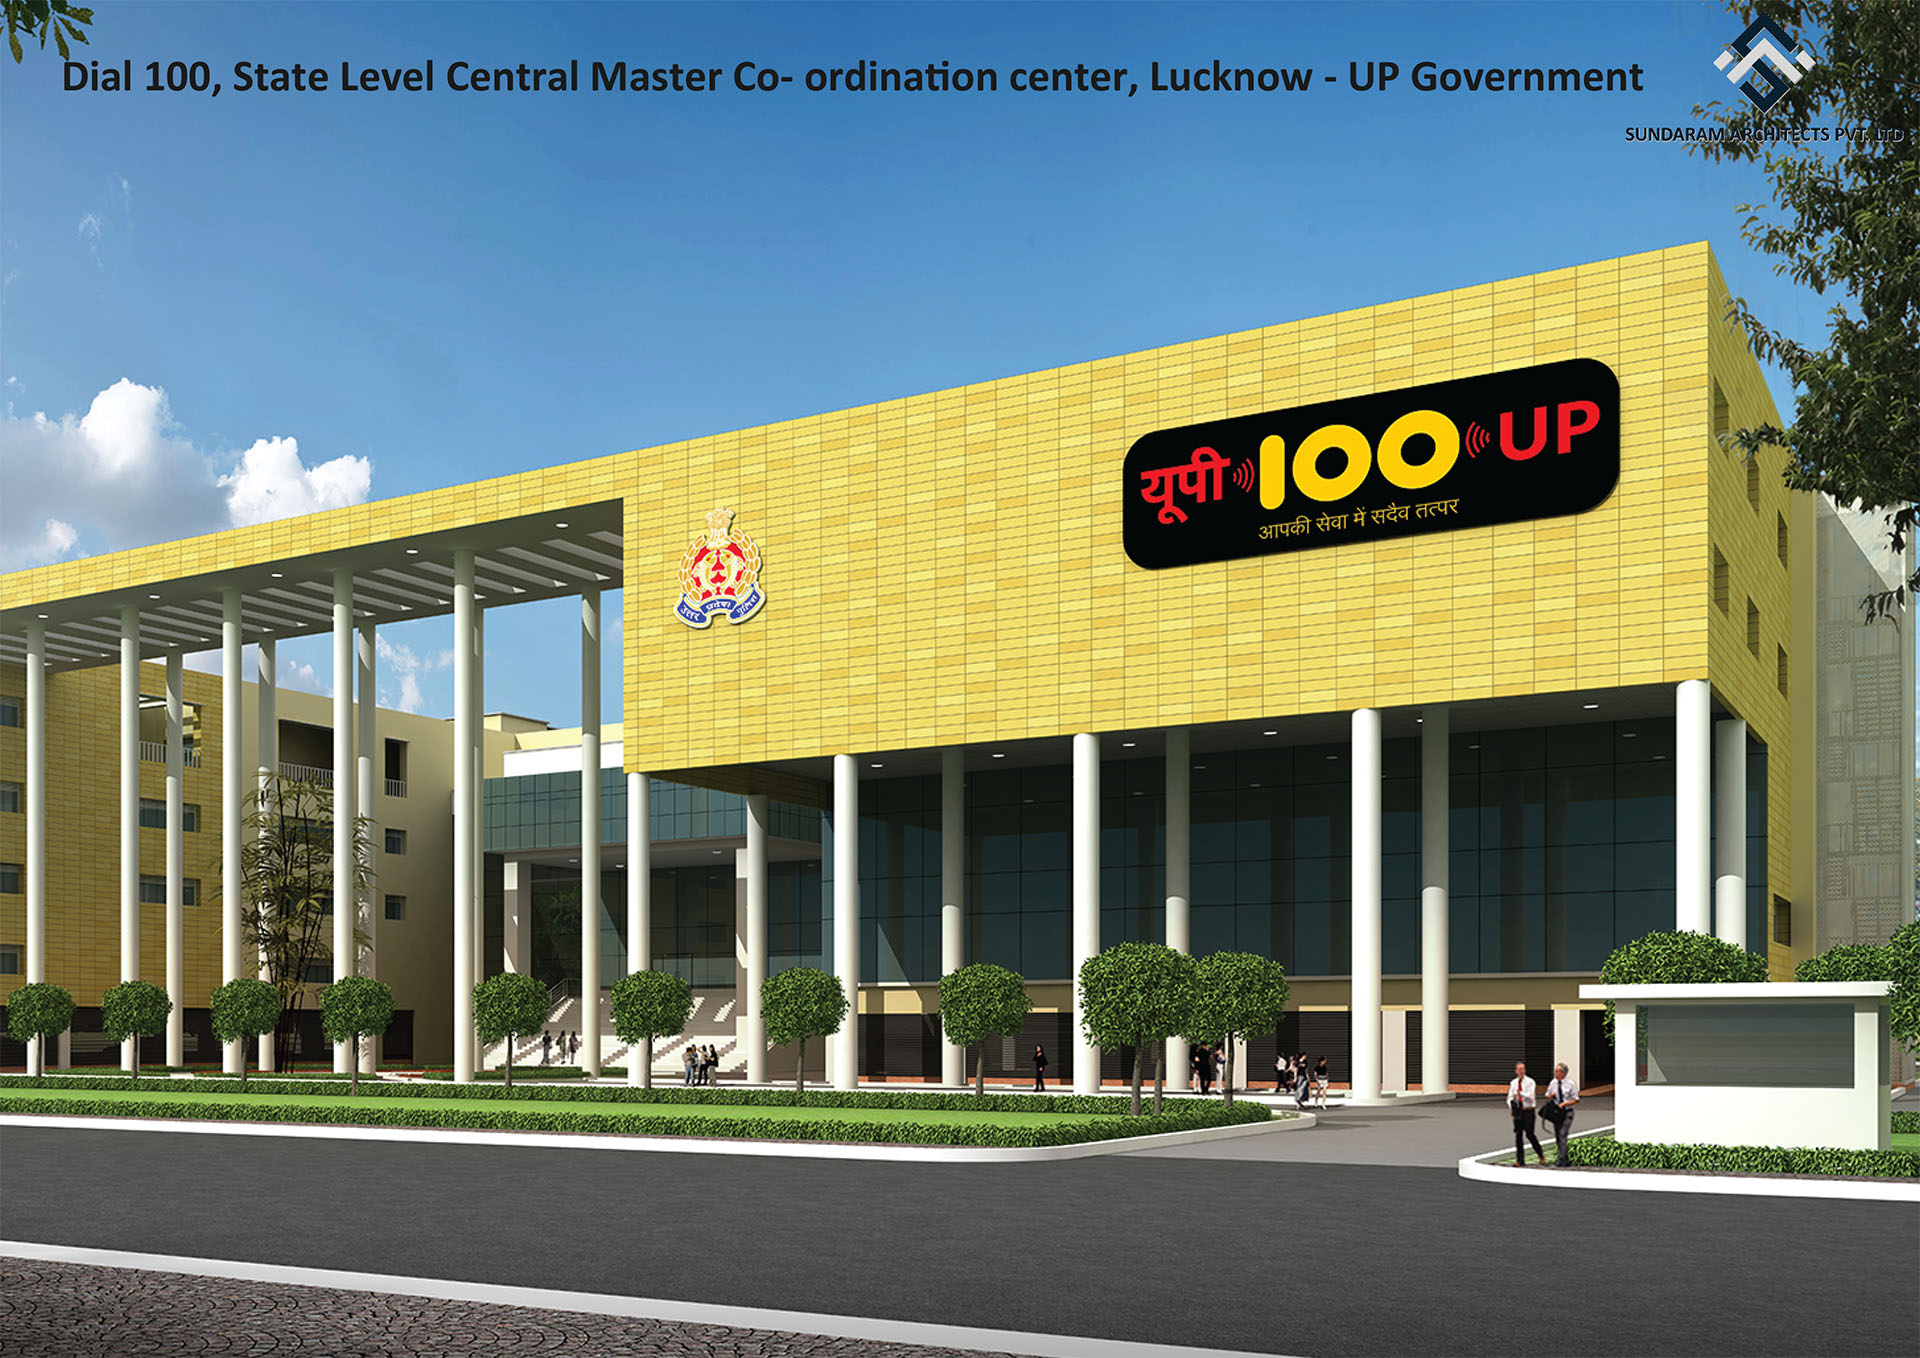 Dial 100, State Level Central Master Co-ordinataion Center, Lucknow - UP Government - Civic & Government Design